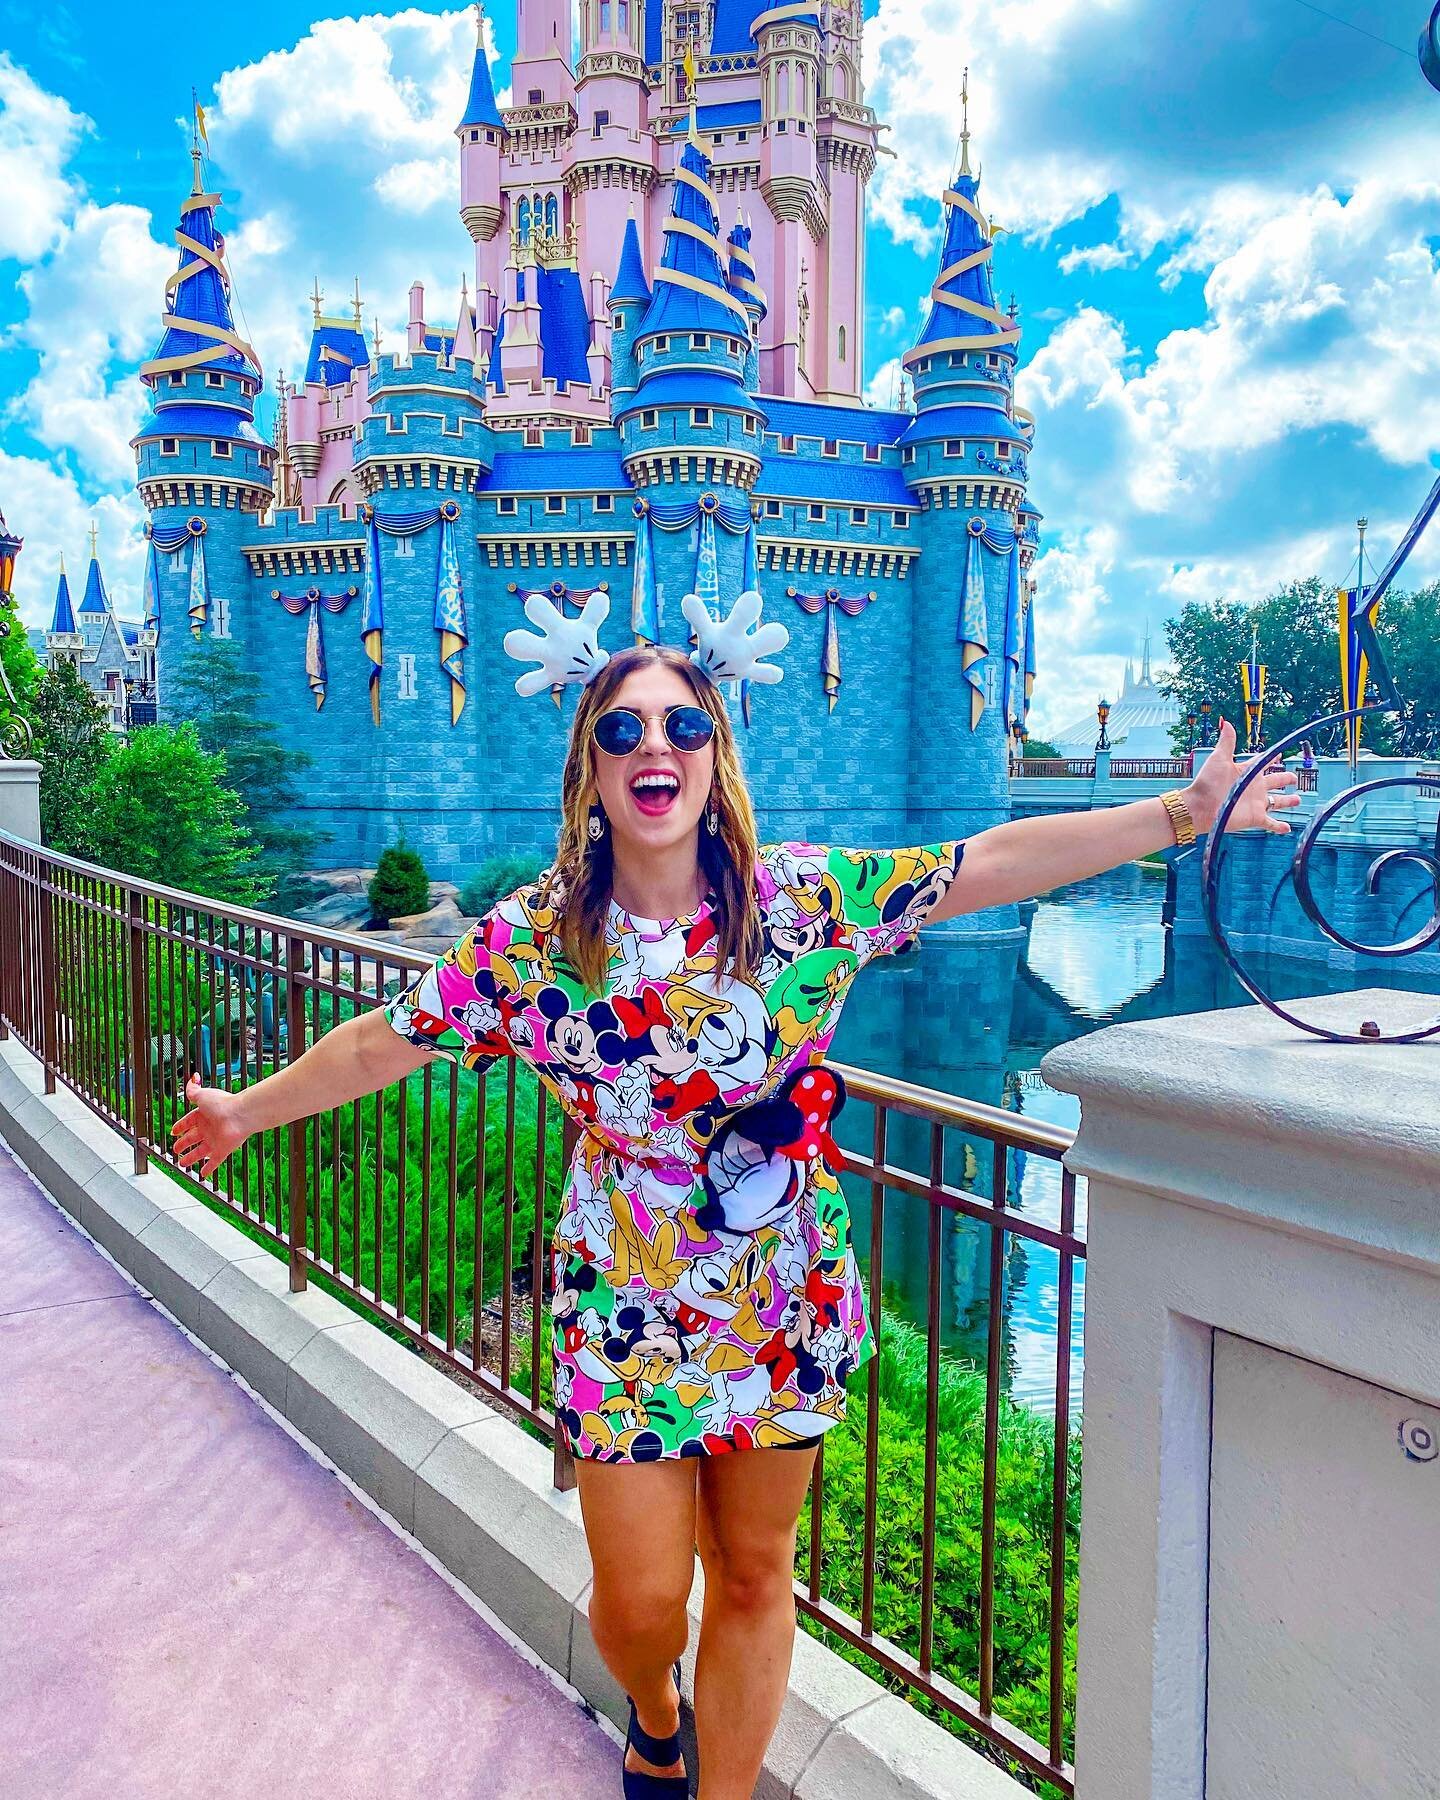 honey, I&rsquo;m home 🏰 
.
.
.
back at @waltdisneyworld for a long weekend! so excited to be here for some magical moments ✨ #waltdisneyworld #disneyworld #magicalmoments #magickingdom #wdw #disney